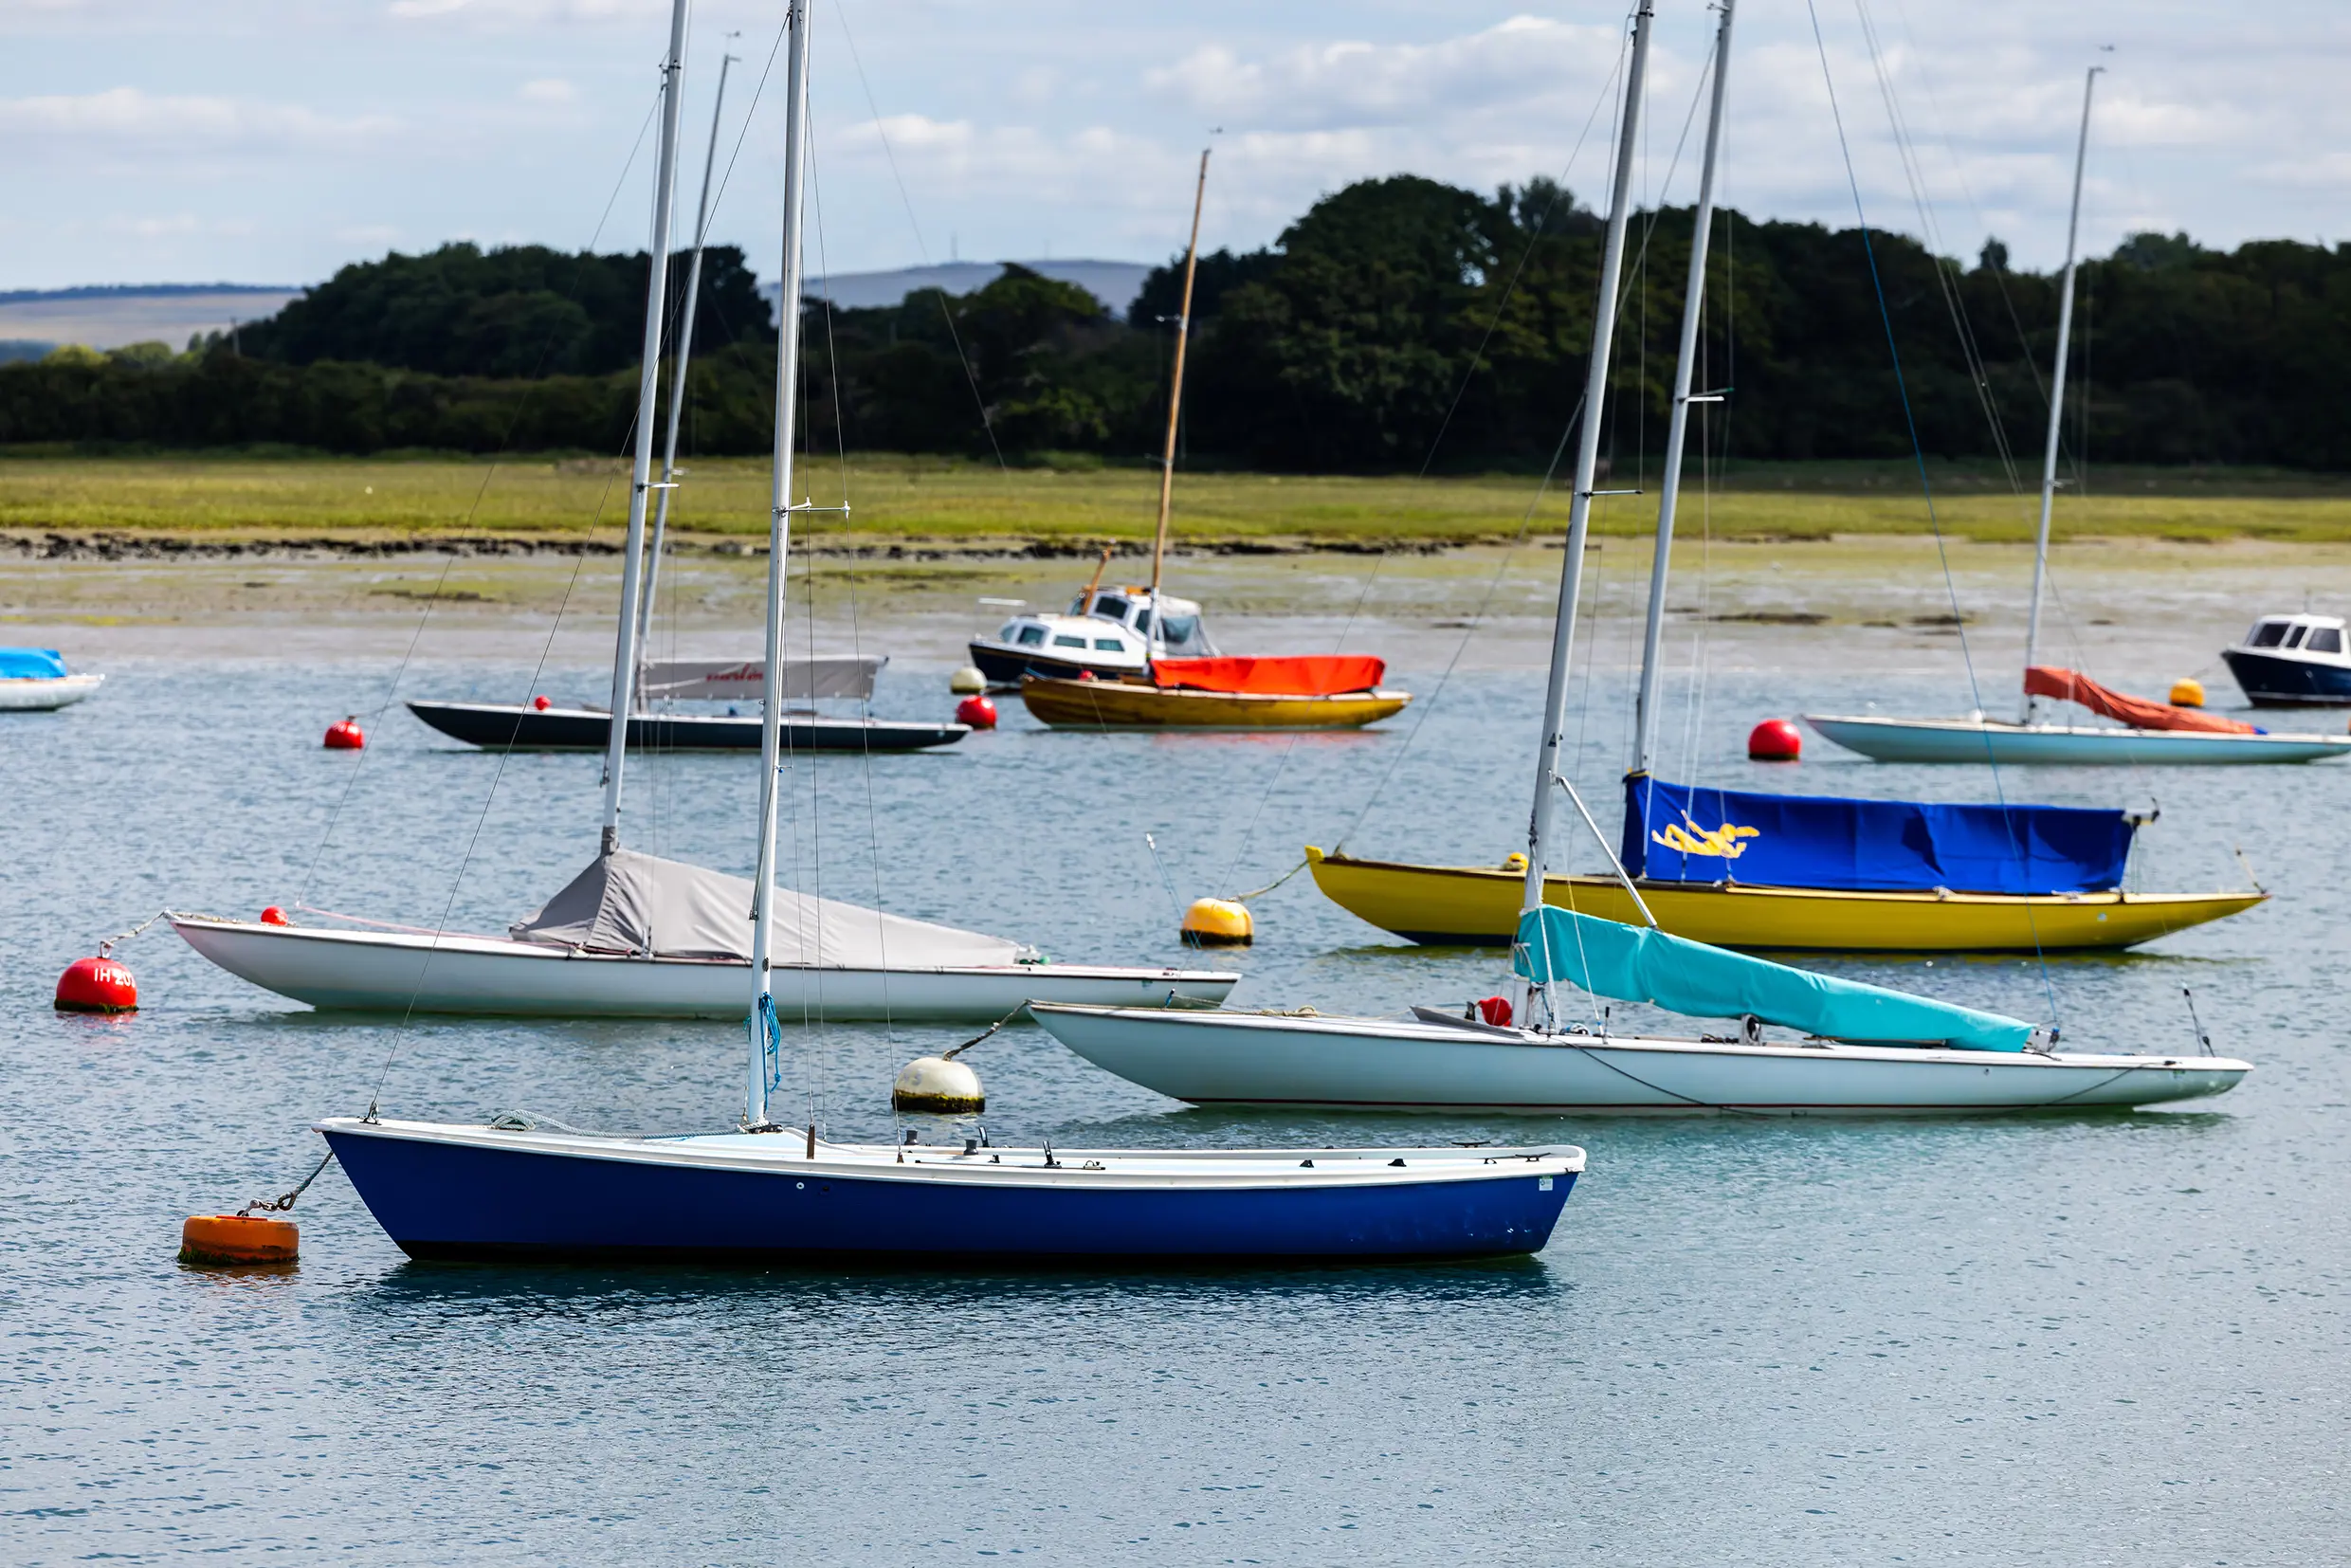 Sailing boats moored at Chichester Harbour